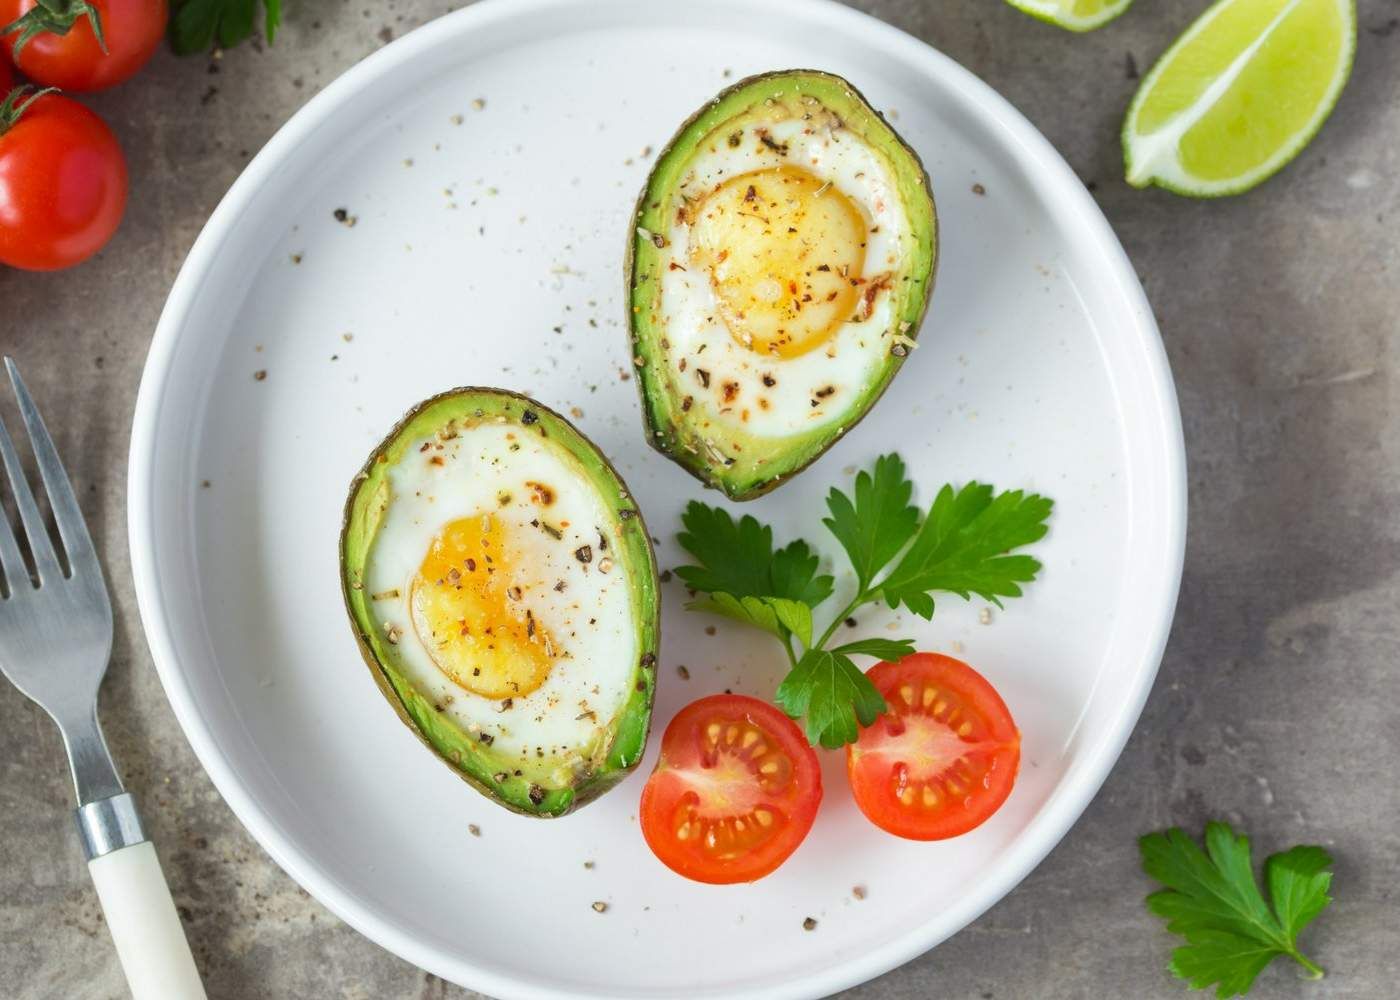 Egg recipe for avocado baked eggs with tomatoes and fresh herbs.